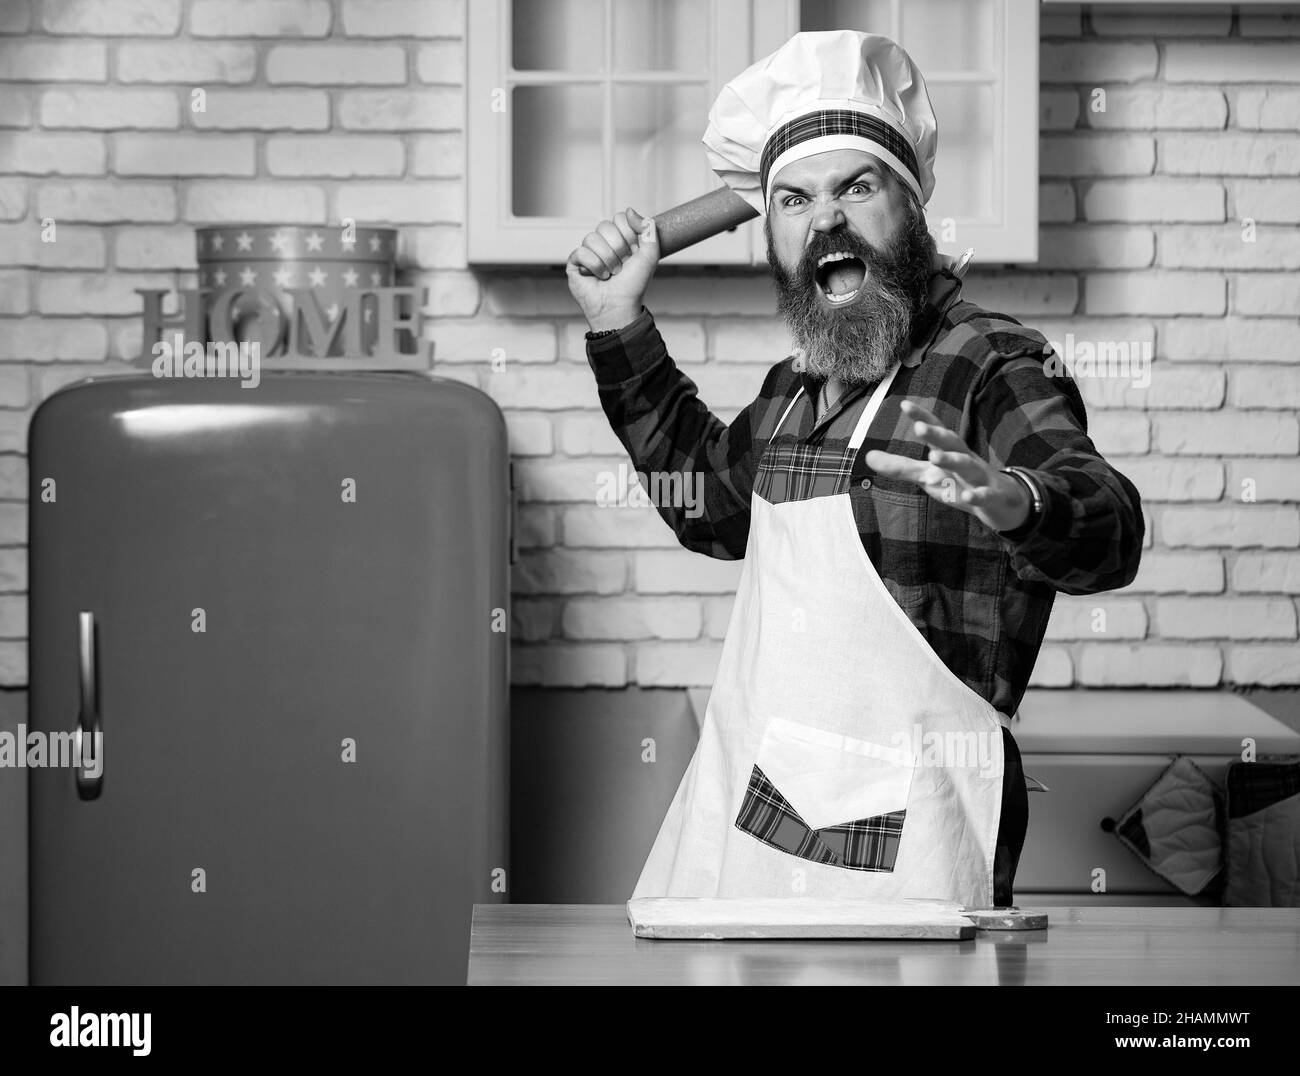 Cooking food concept. Holding rolling pin, clenching fist, screaming. Stock Photo